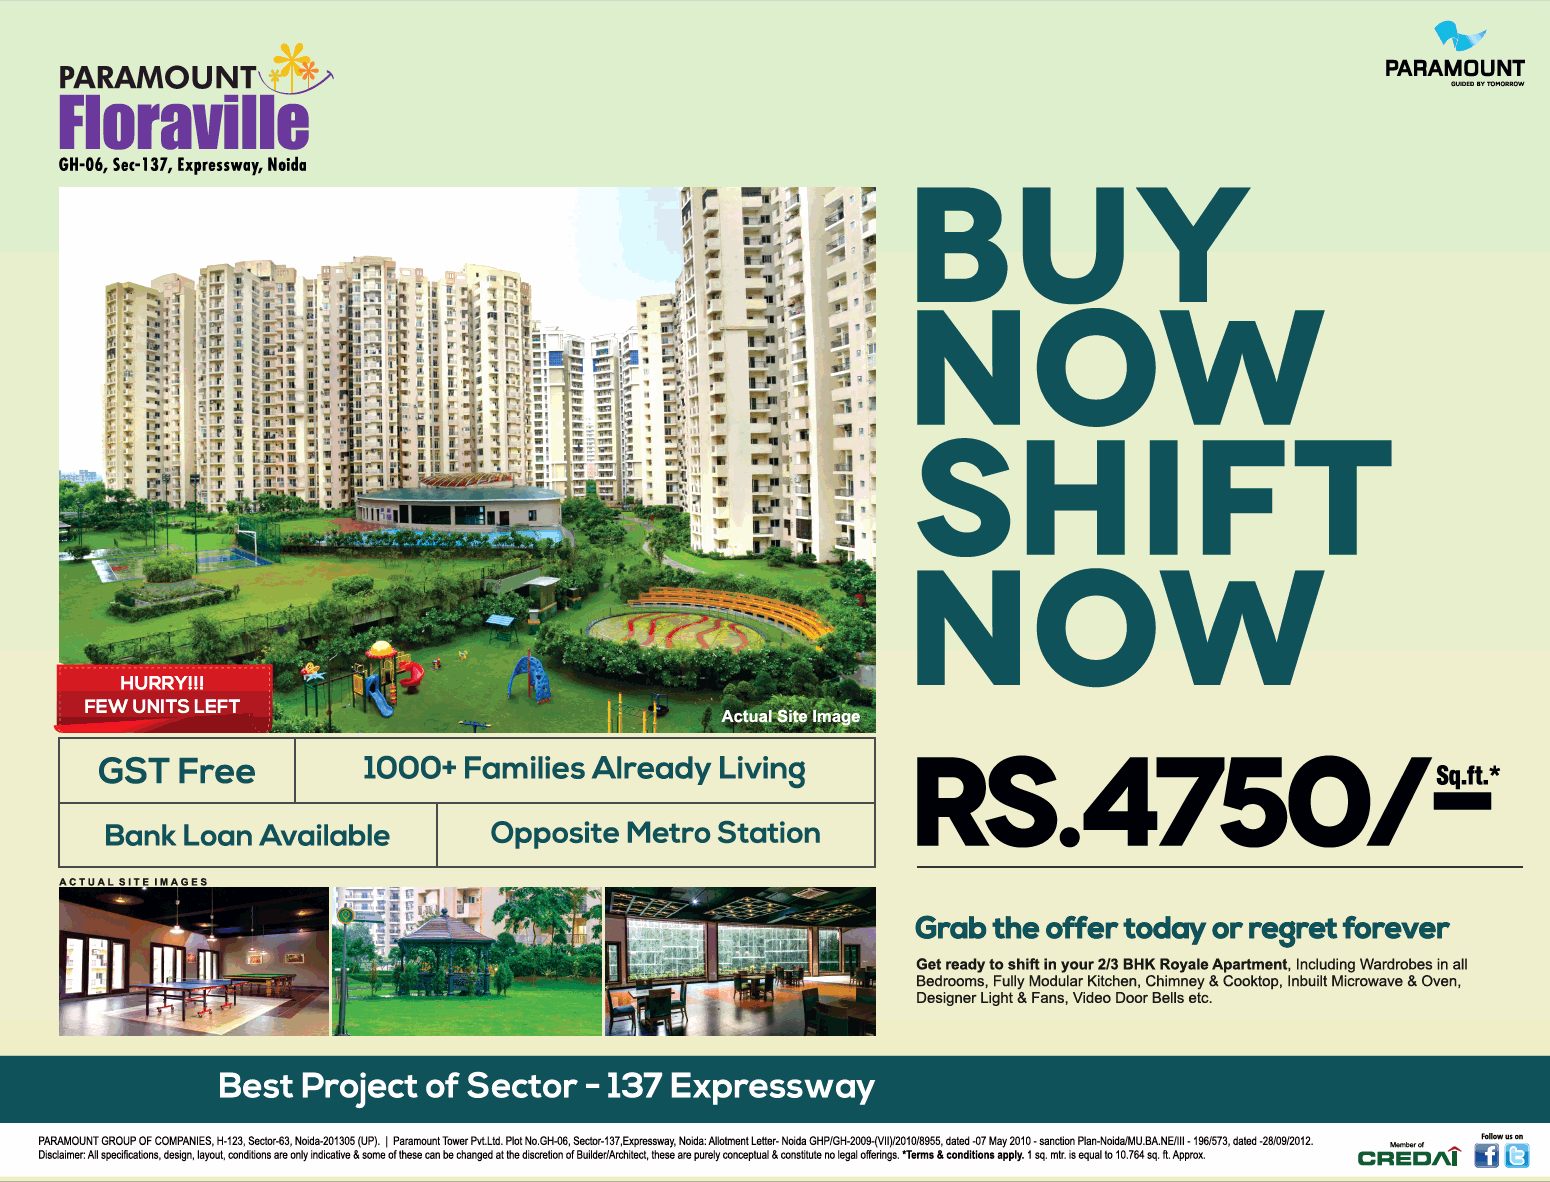 Grab the offer today at just Rs. 4750 per sqft. at  Paramount Floraville in Noida Update